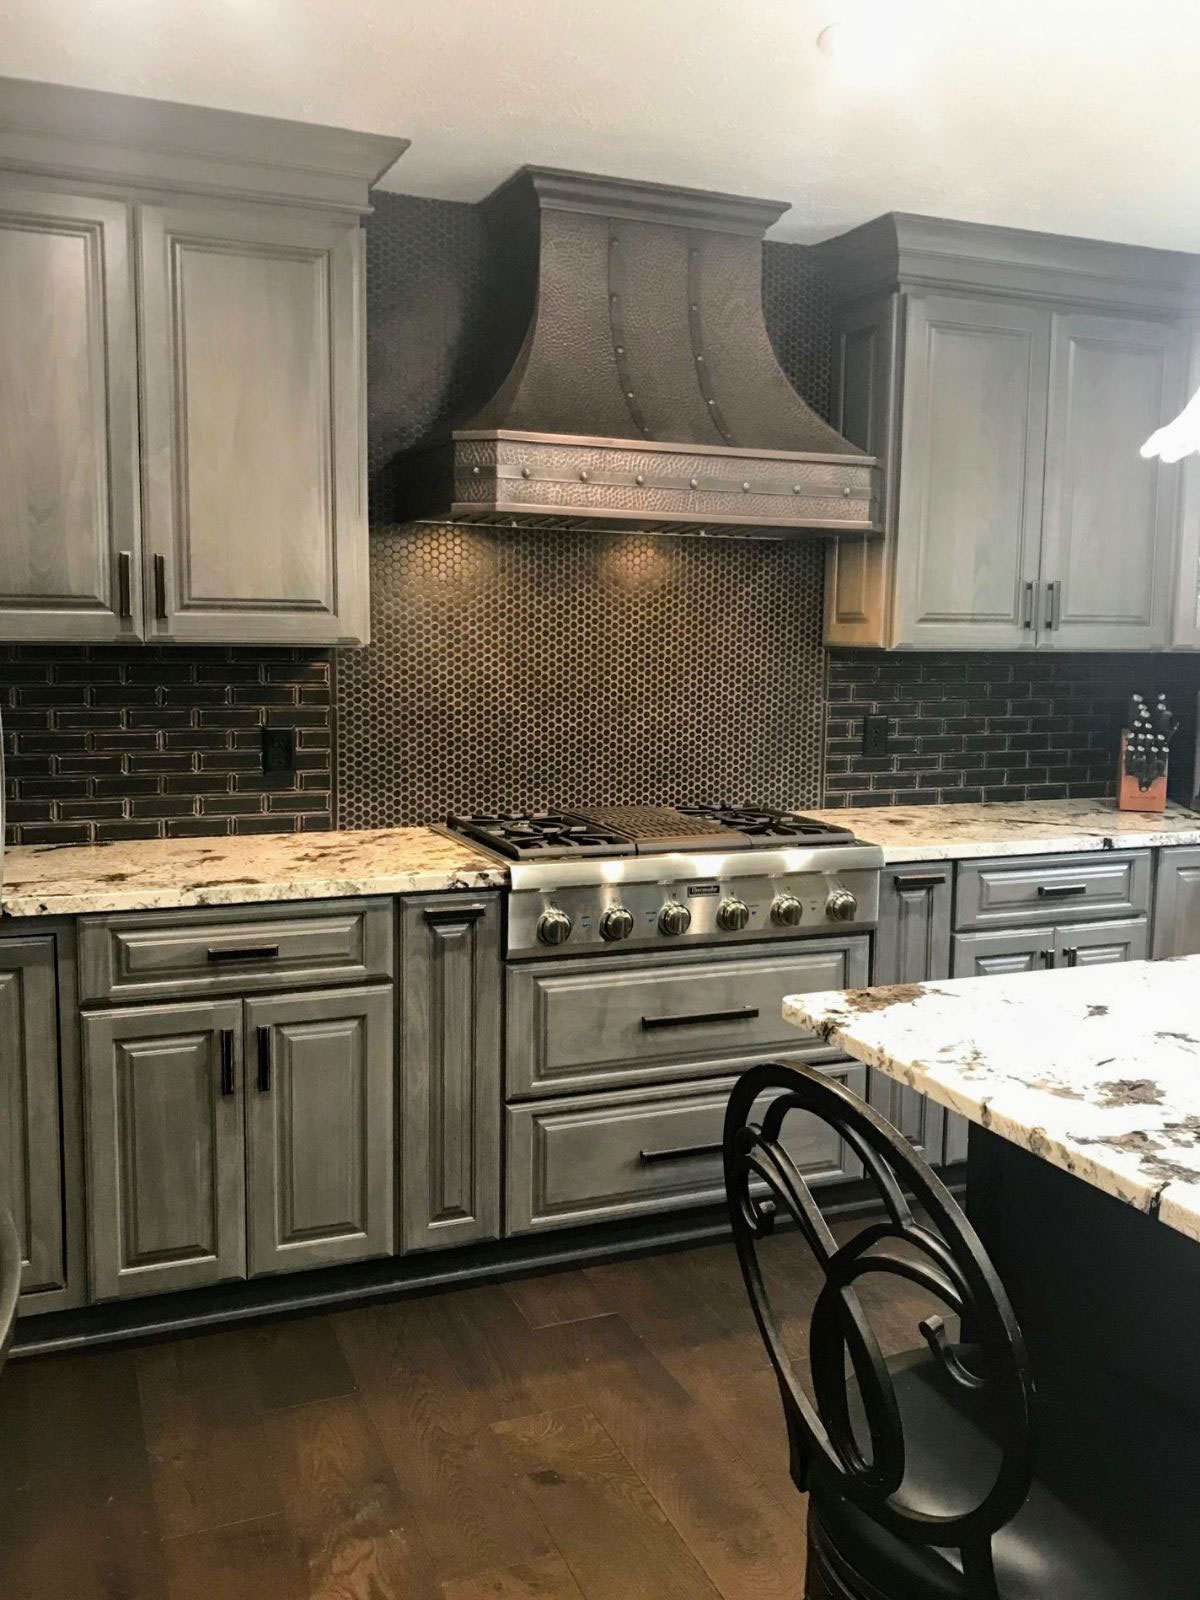 Modern metallic kitchen with granite countertop and hood World CopperSmith